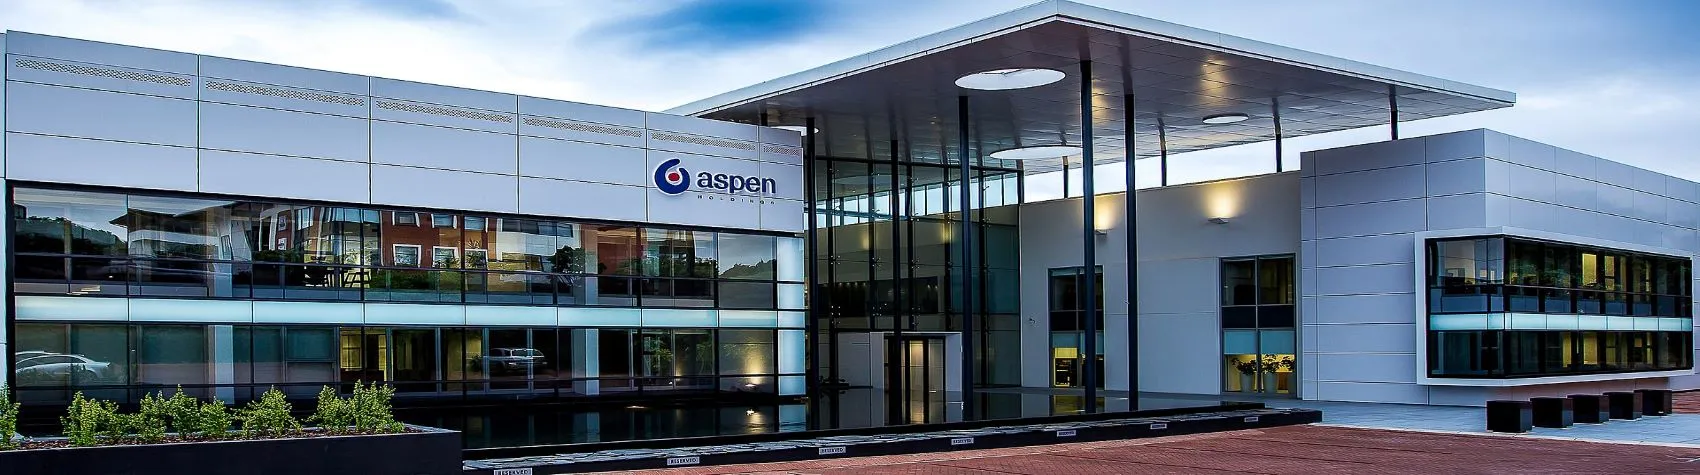 1920px-Aspen_Place_Durban_South_Africa-1